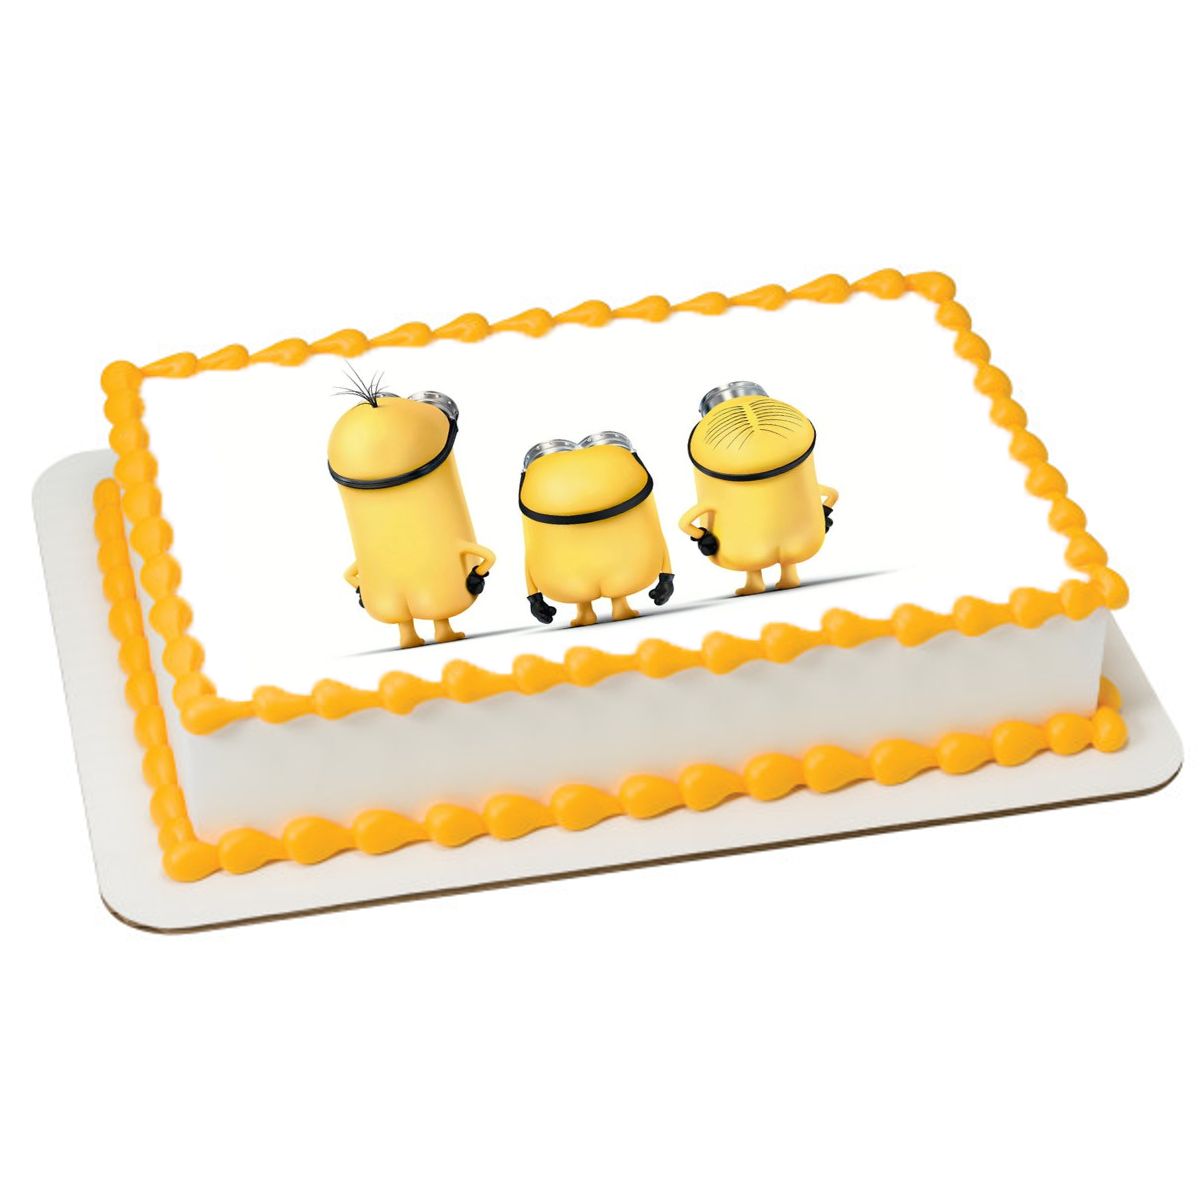 minions birthday cake toppers